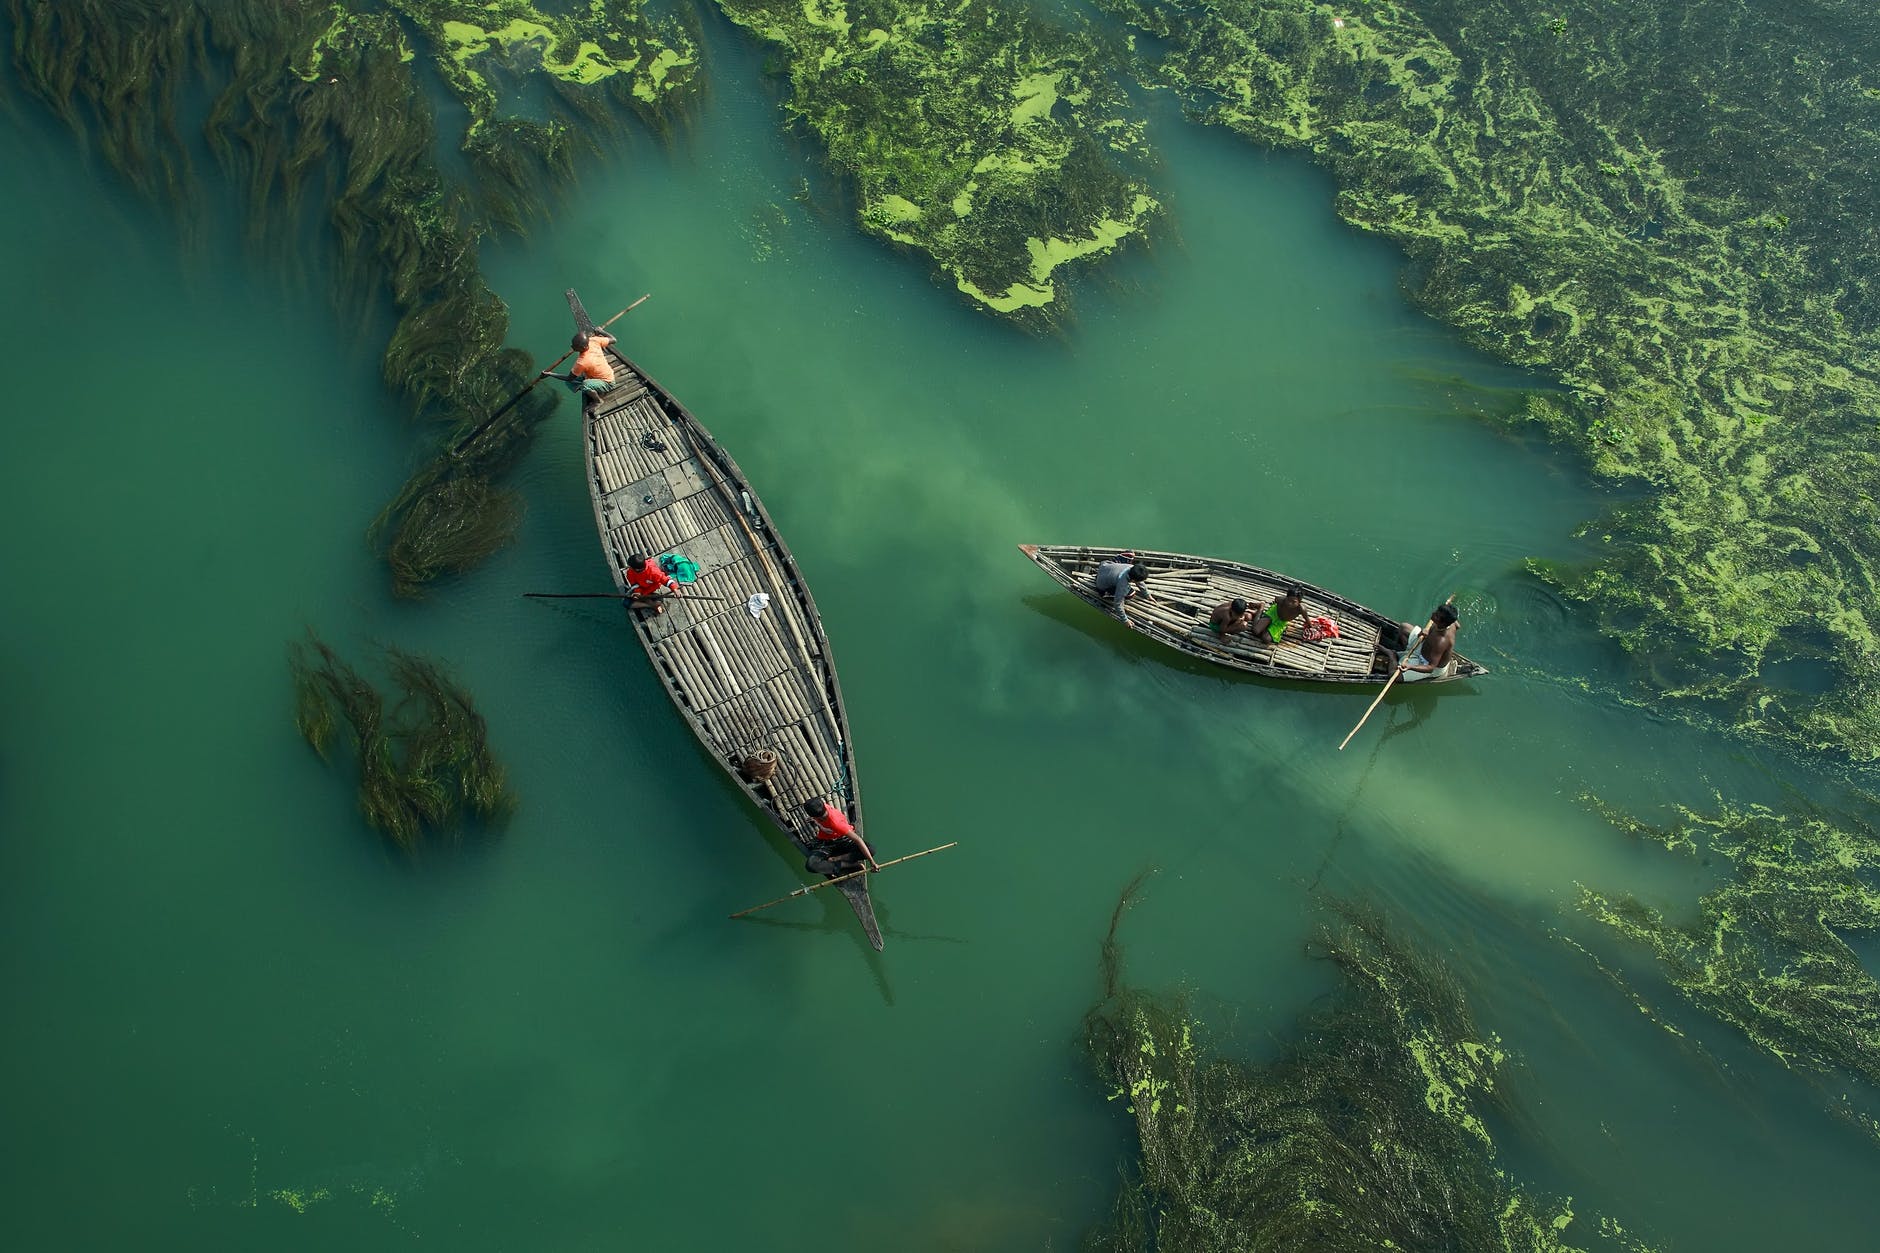 men rowing on boats on an open water covered with algae